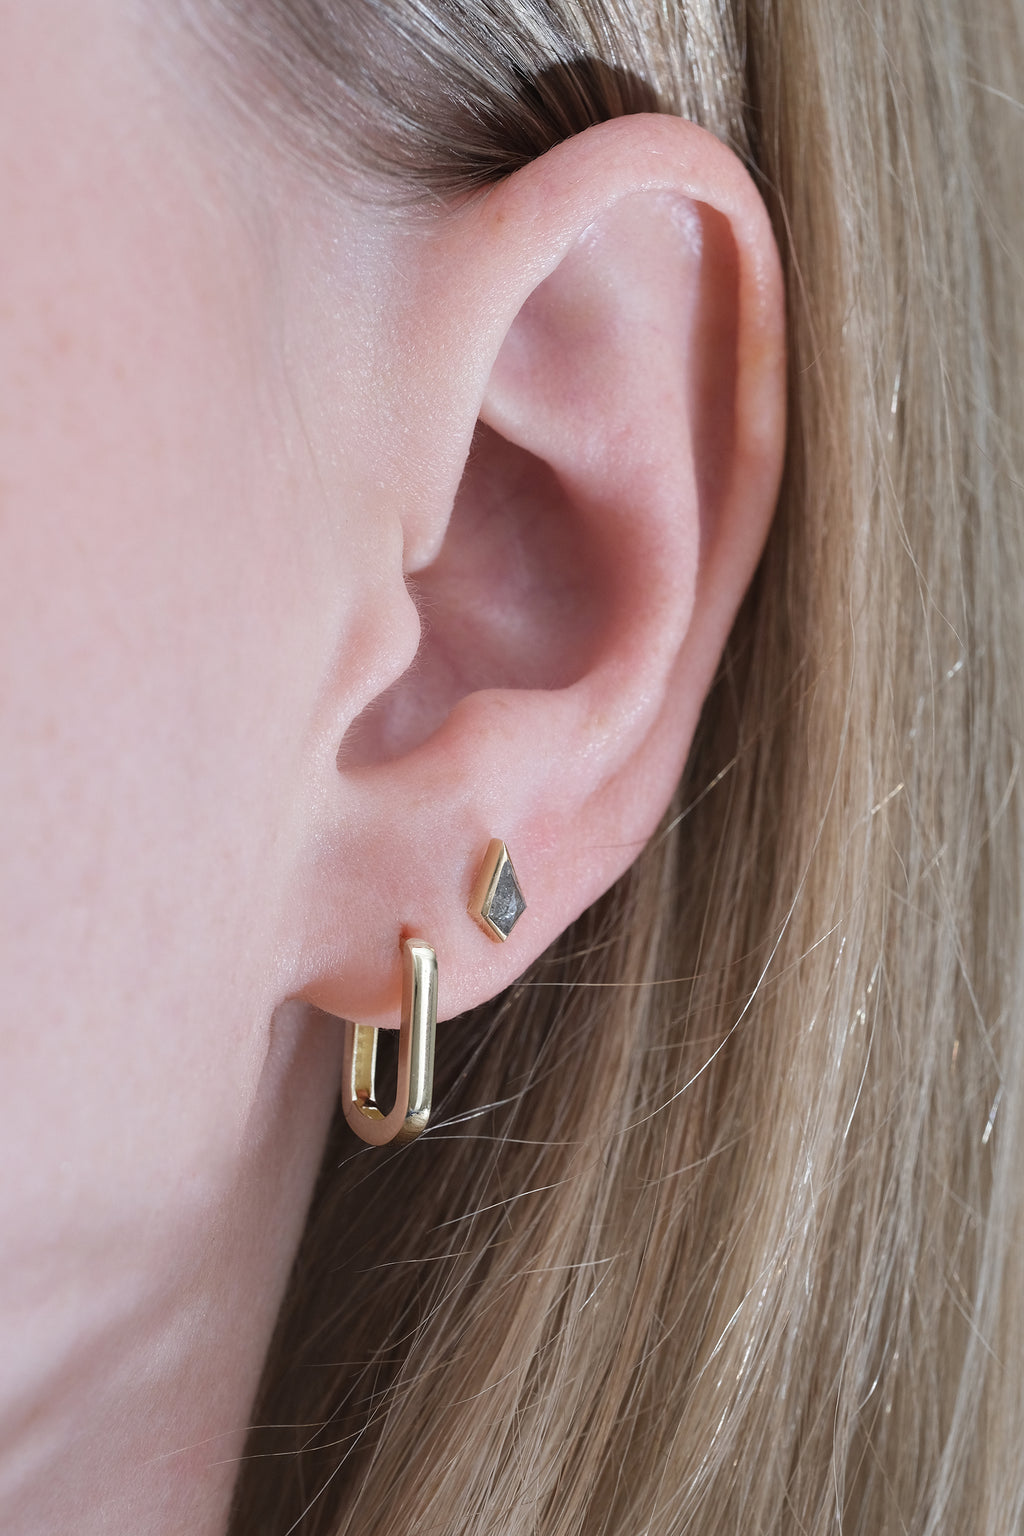 ONLINE EXCLUSIVE - Small Square “Huggies Paper Clip” Earrings // 10K Yellow Gold